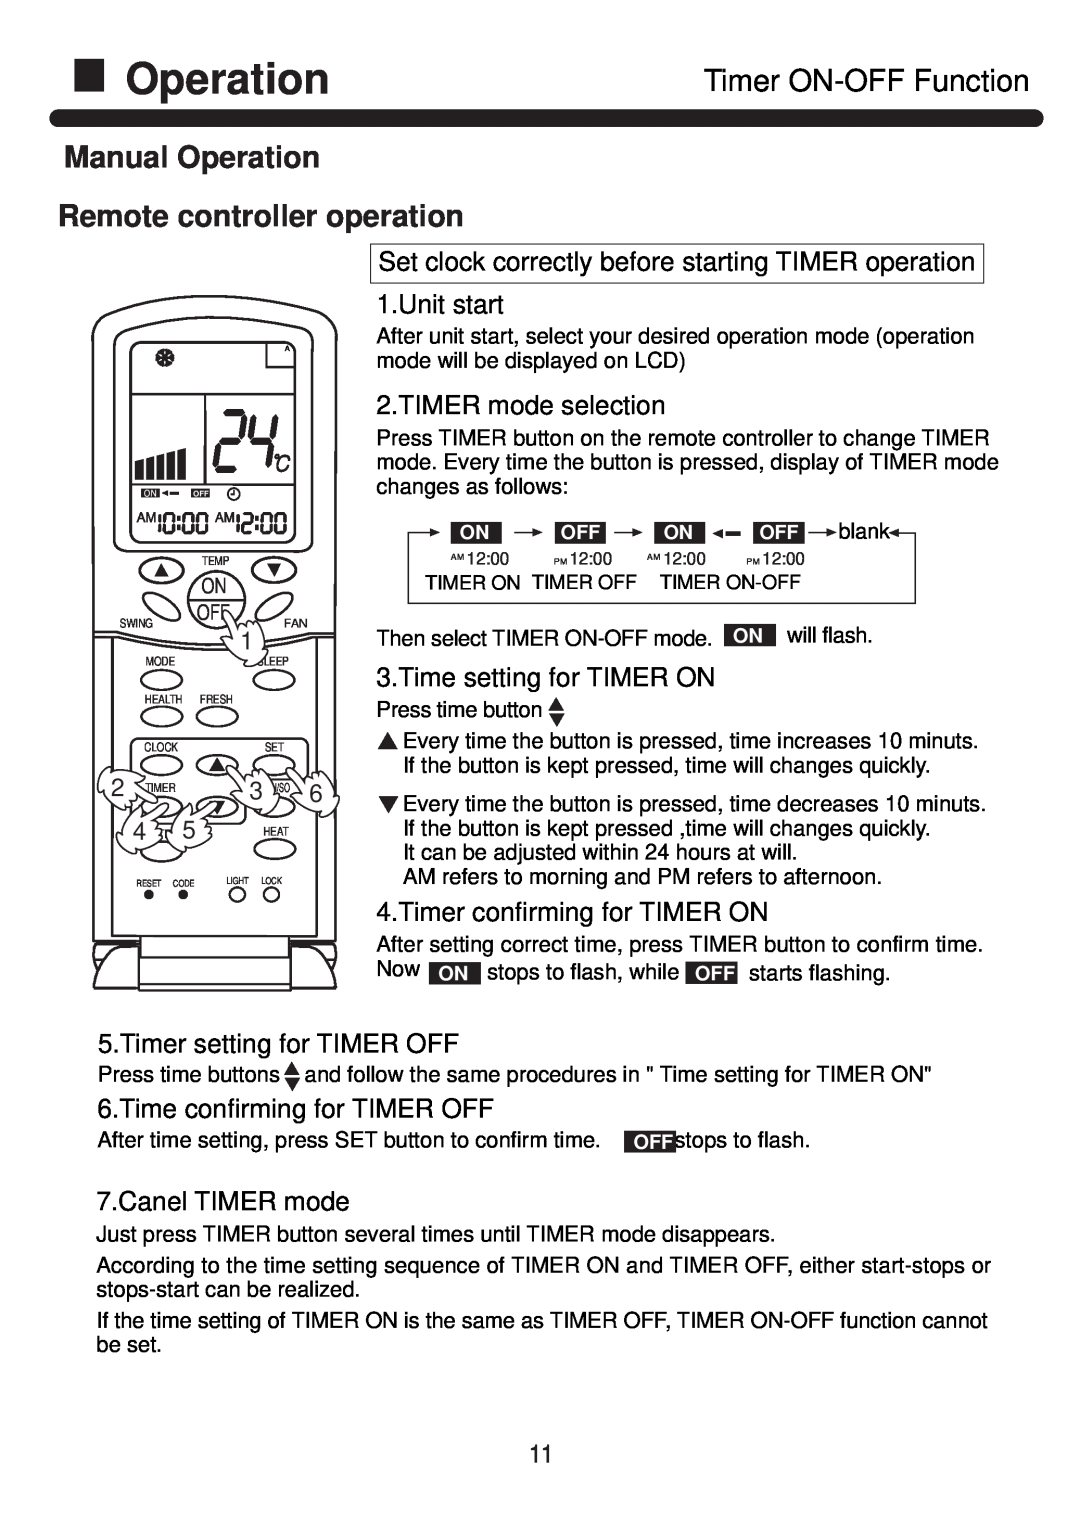 Haier HPU-42CF03 operation manual Manual Operation Remote controller operation, Timer ON-OFFFunction, will flash 